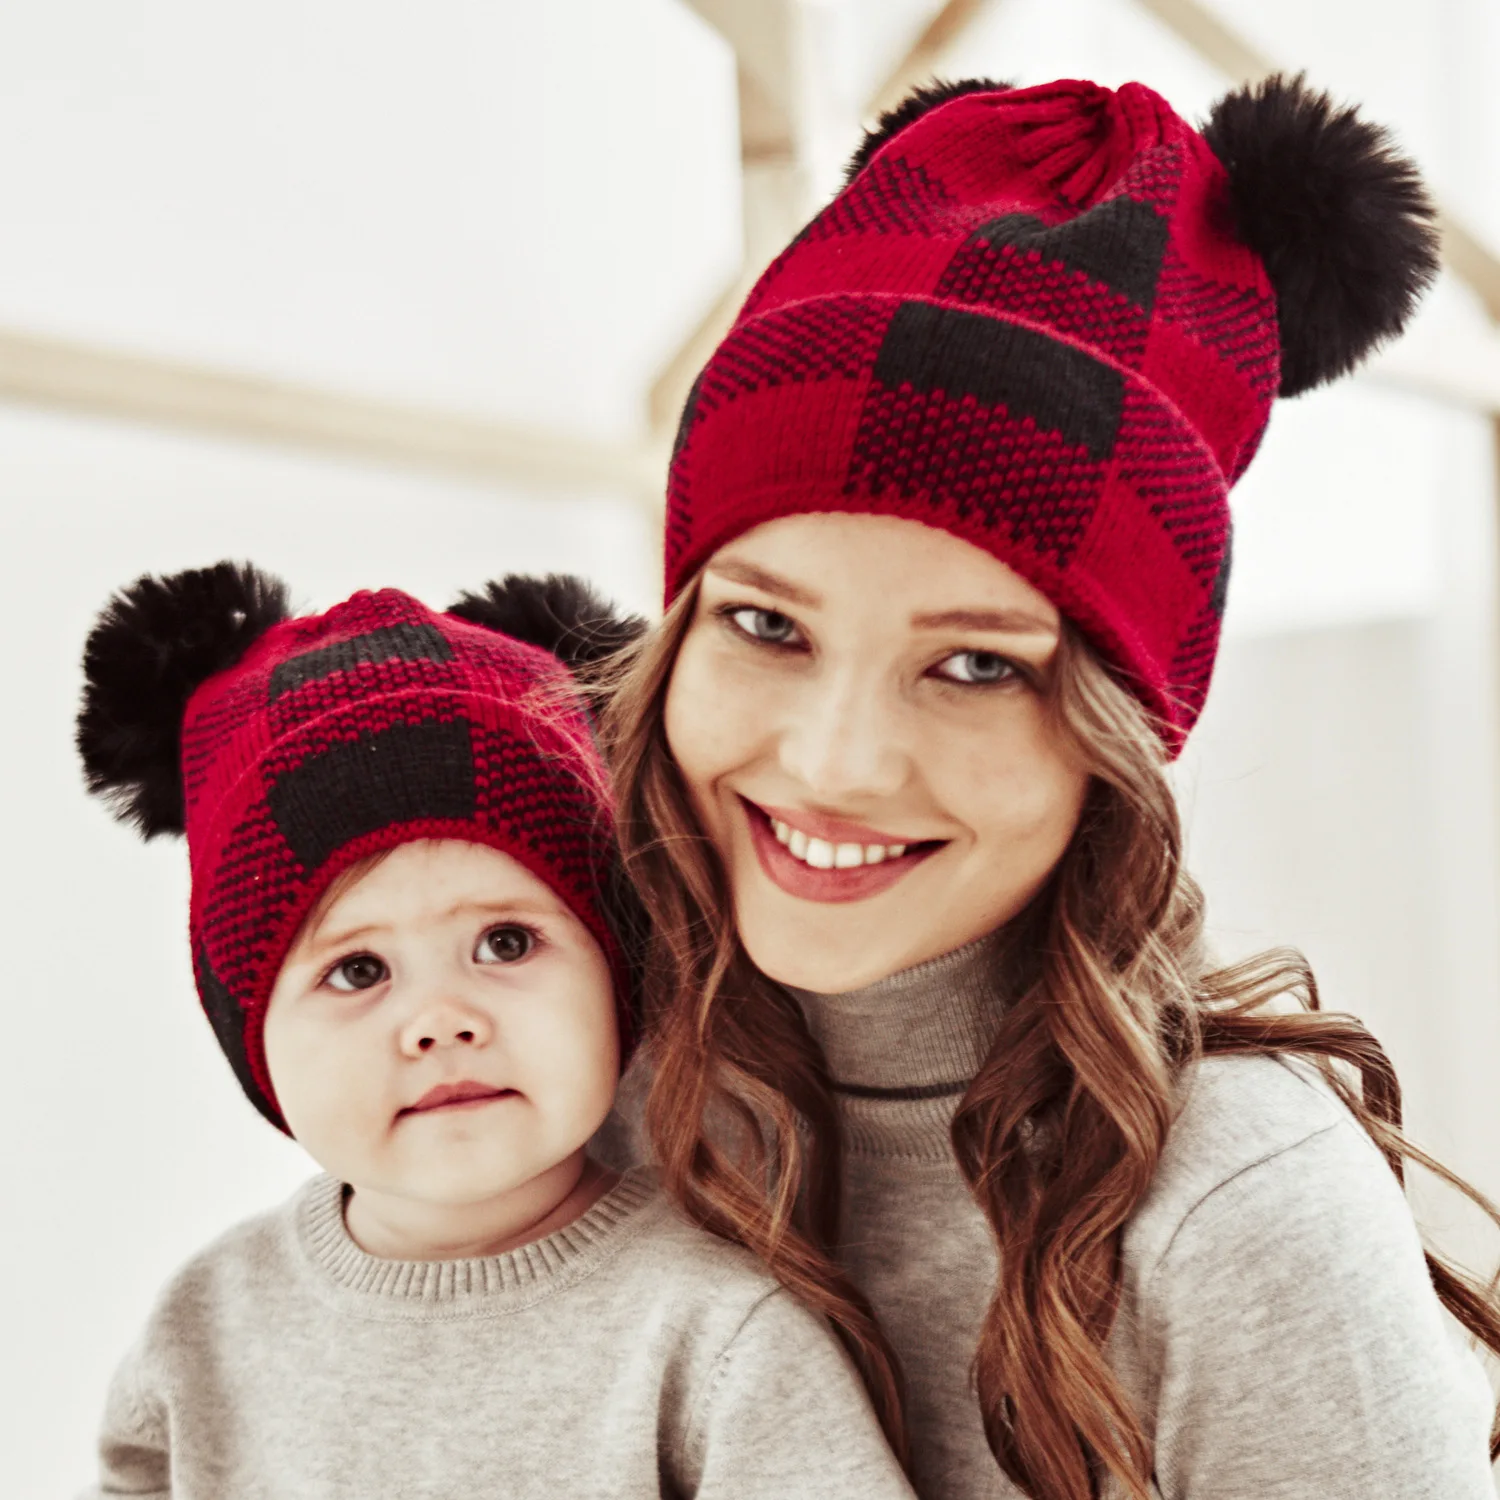 

2022 New Autumn Winter Wool Parent-Child Knitted Hat Plaid Pom Pom Ball Beanie Caps Mother Baby Christmas Warm Hats Bonnet